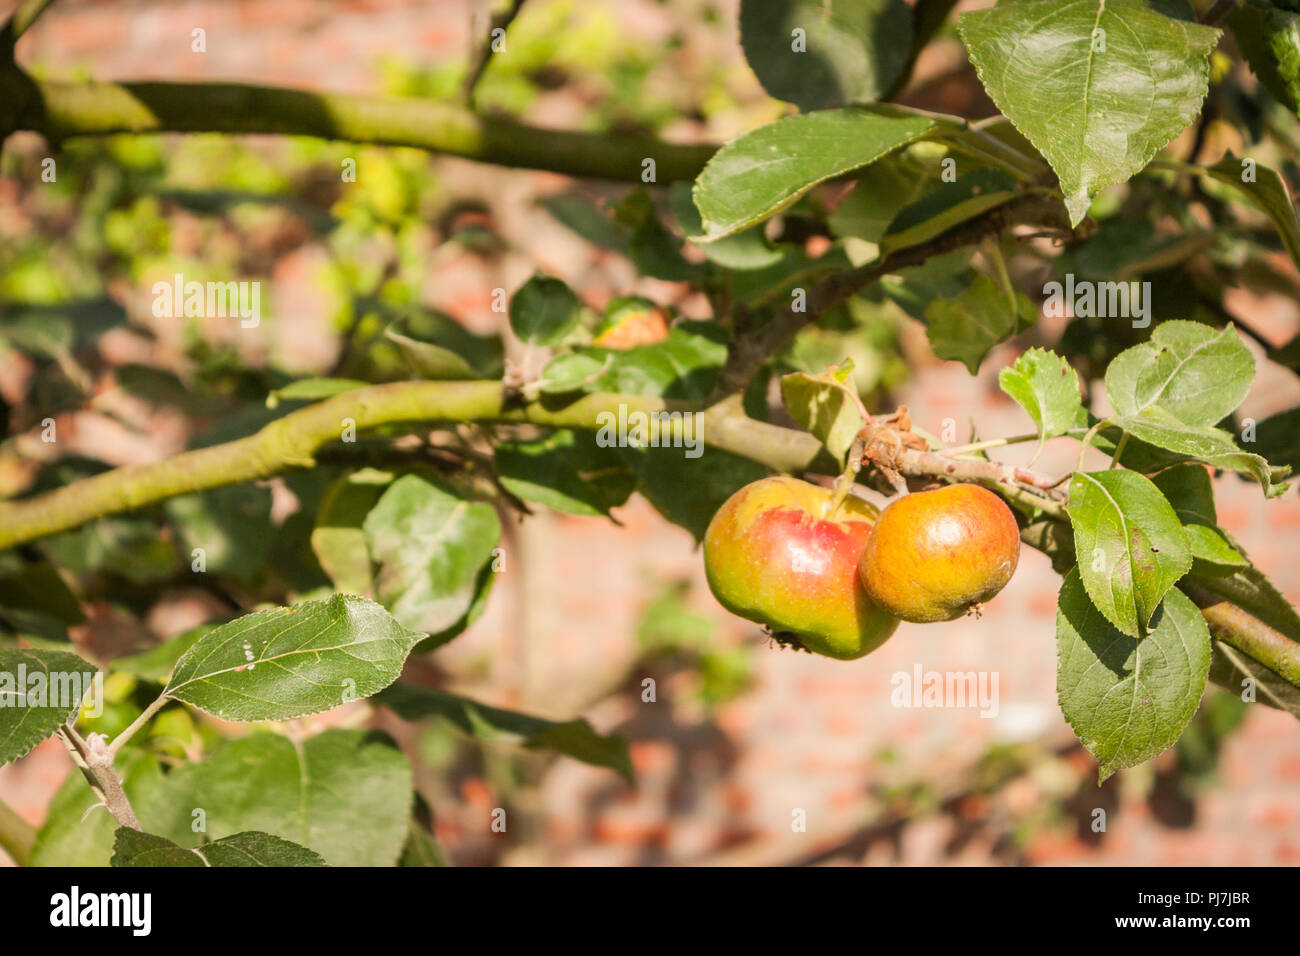 Apples ripen on a branch in the early autumn sun. Stock Photo